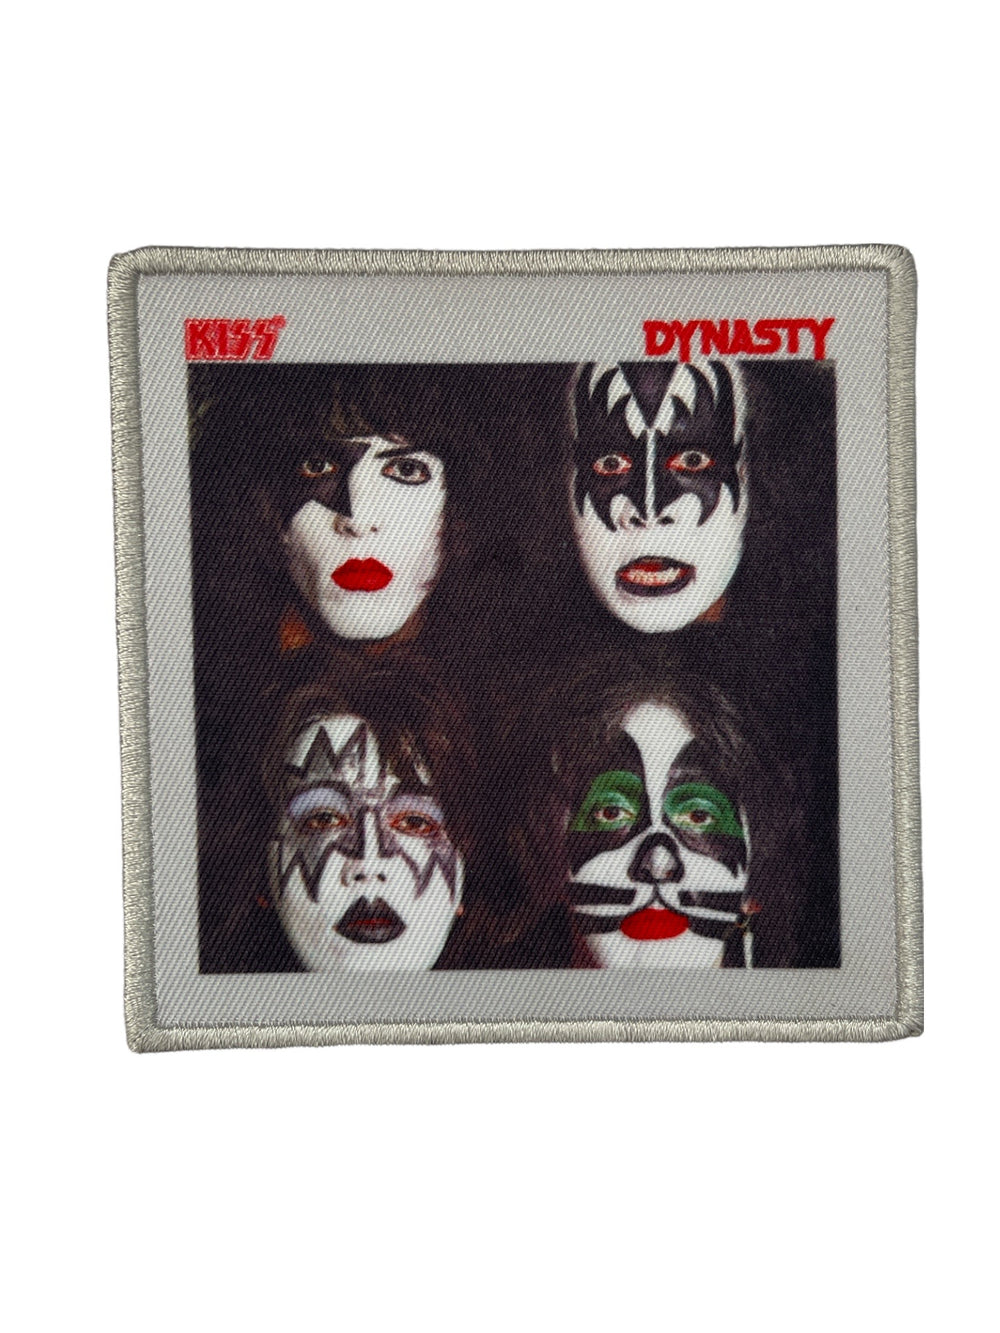 KISS Standard Patch: Dynasty (Album Cover) Official Woven Patch Brand New